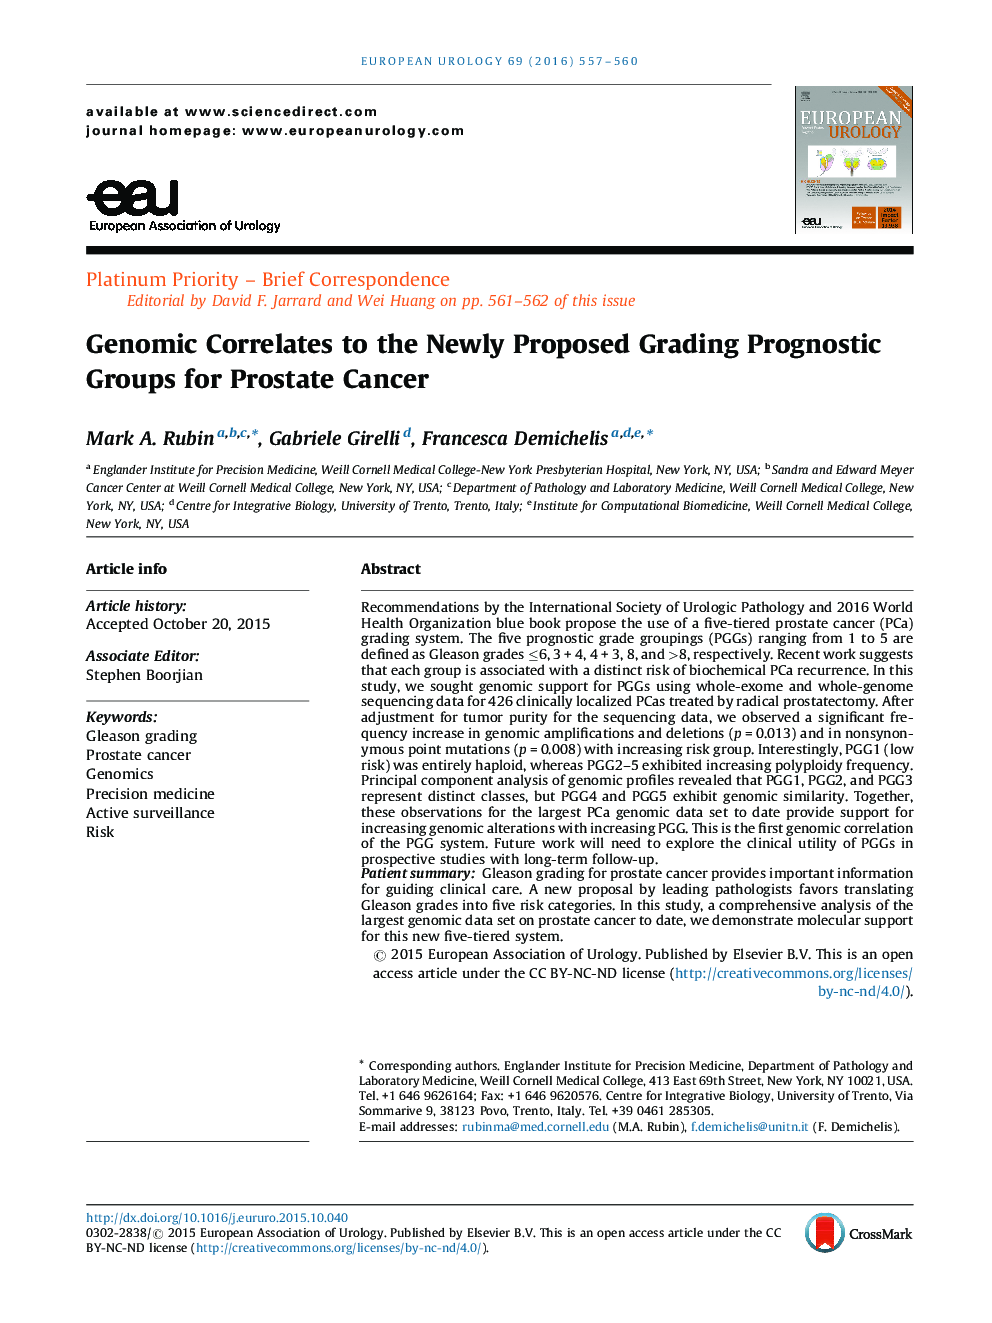 Genomic Correlates to the Newly Proposed Grading Prognostic Groups for Prostate Cancer